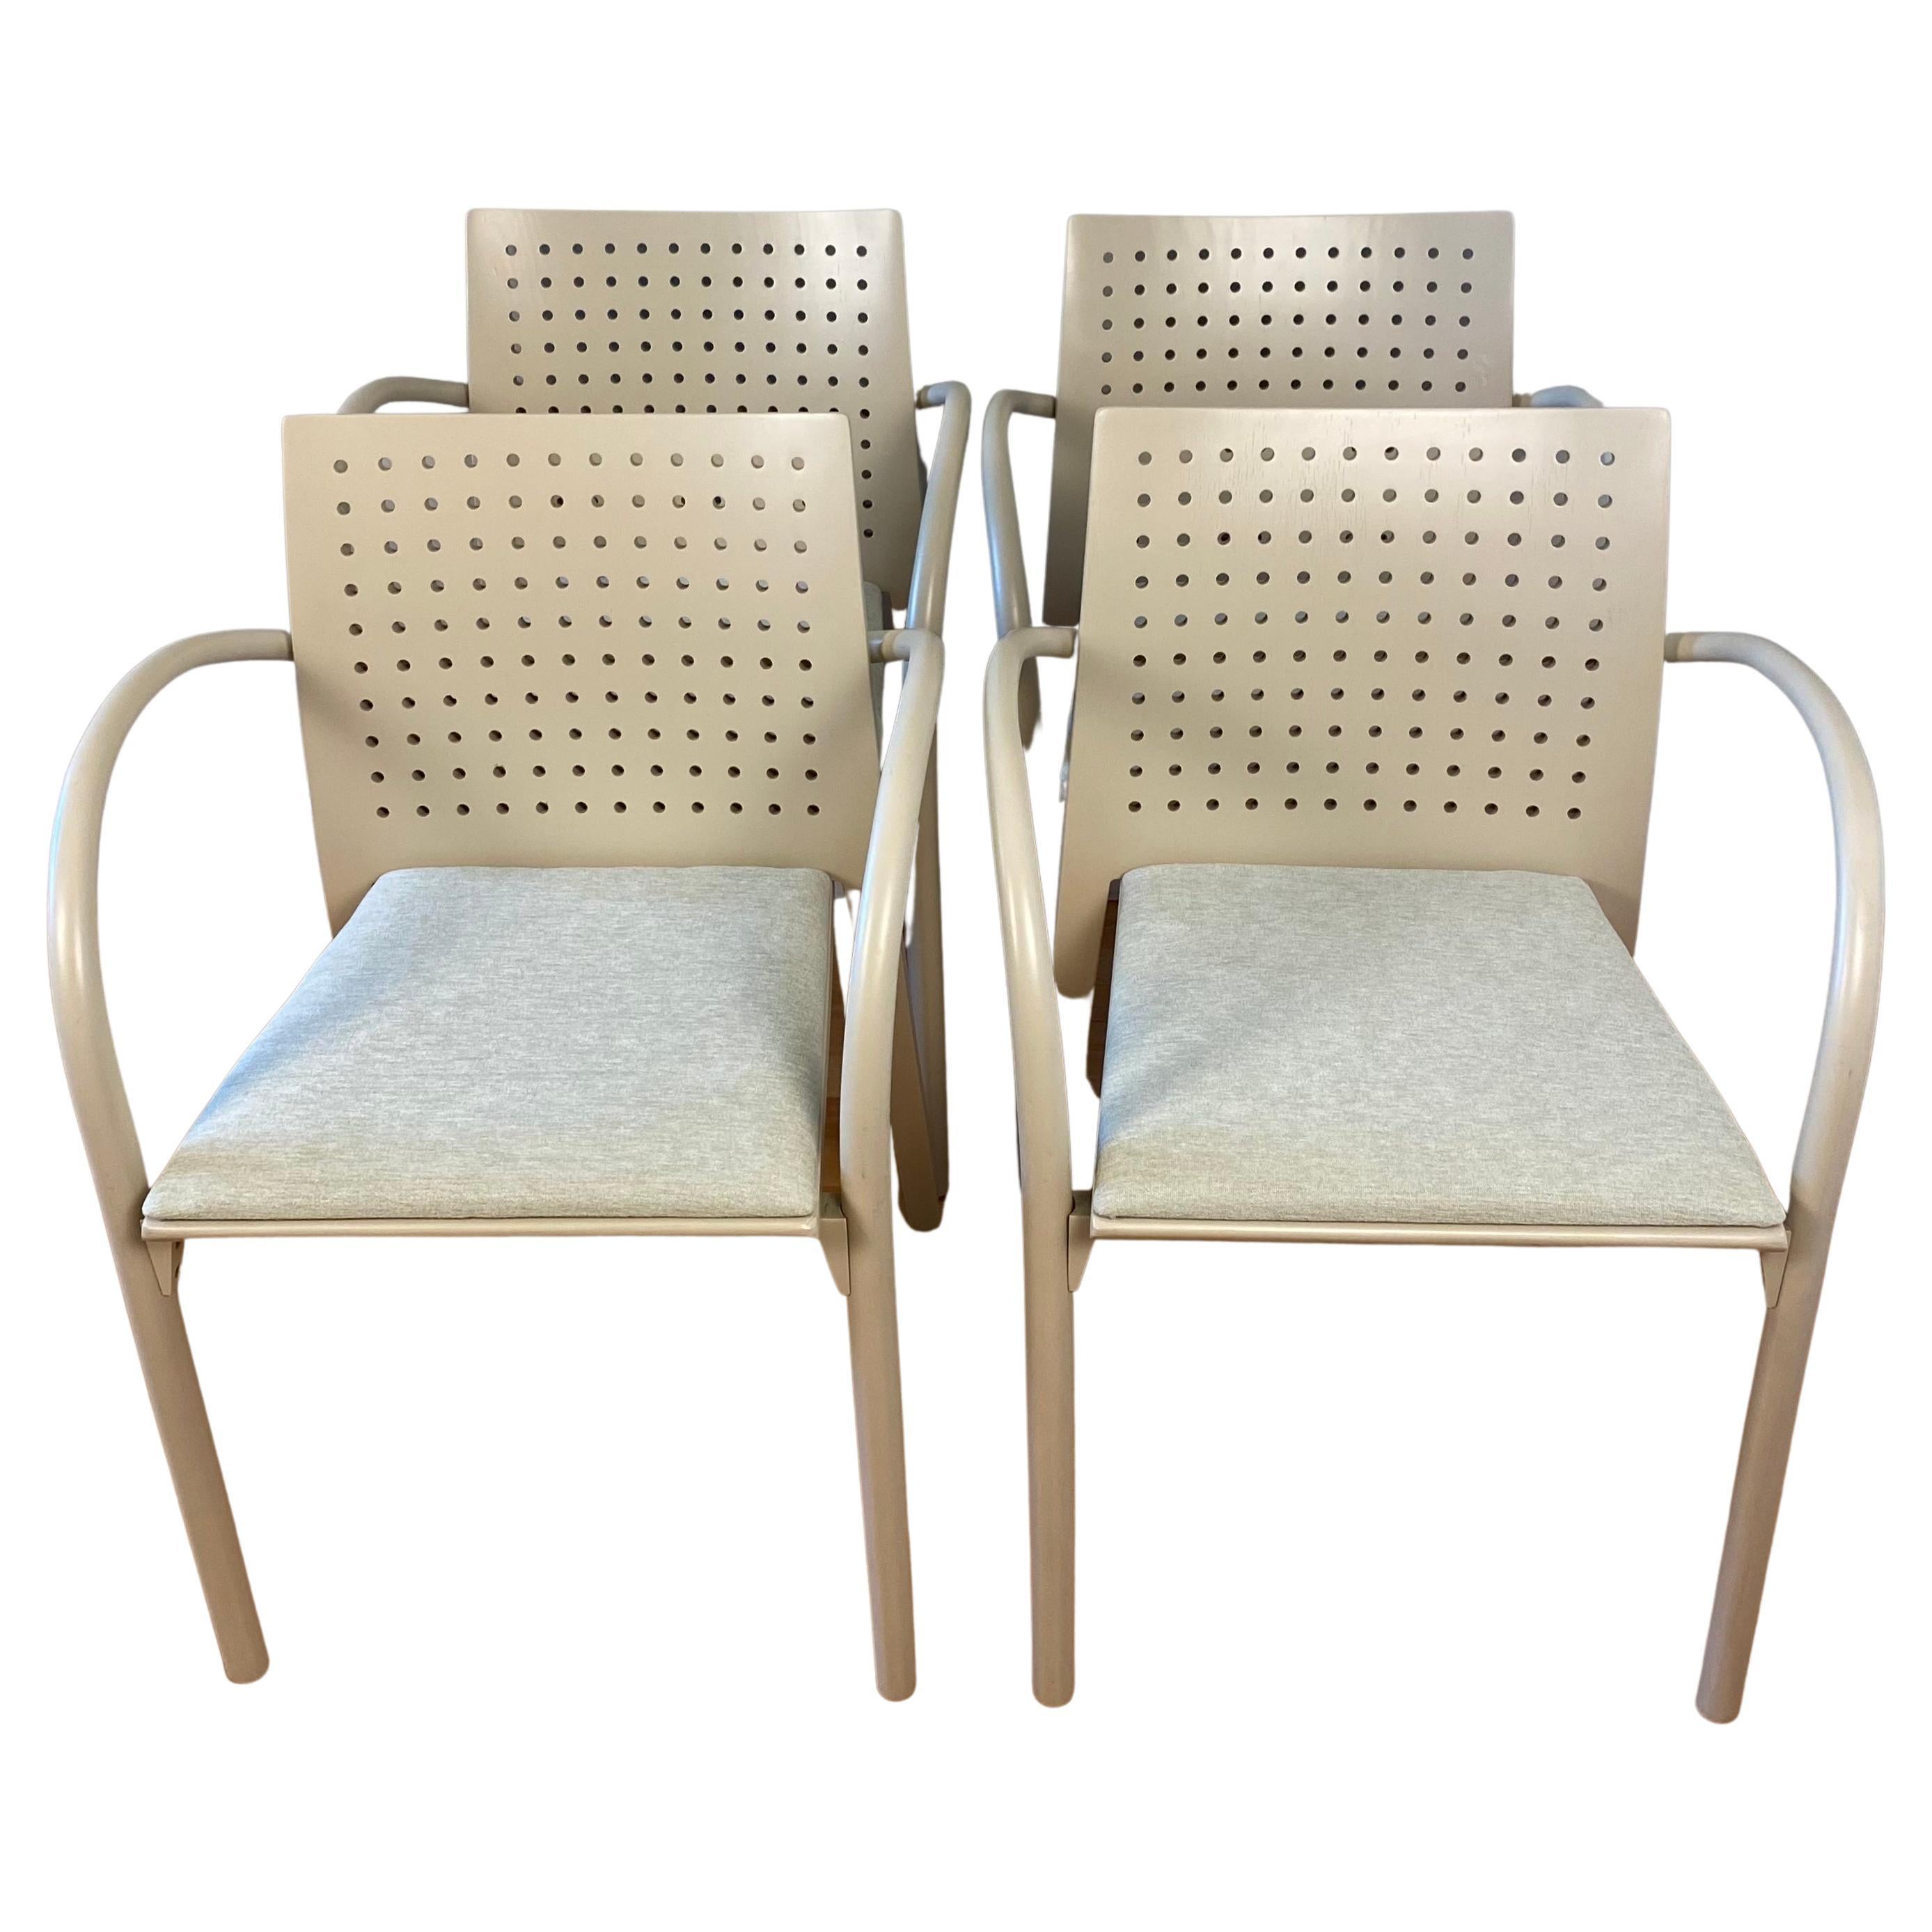 James Irvine Style Set of 4 Dining Chairs Design for Thonet Musee d'Orsay Paris